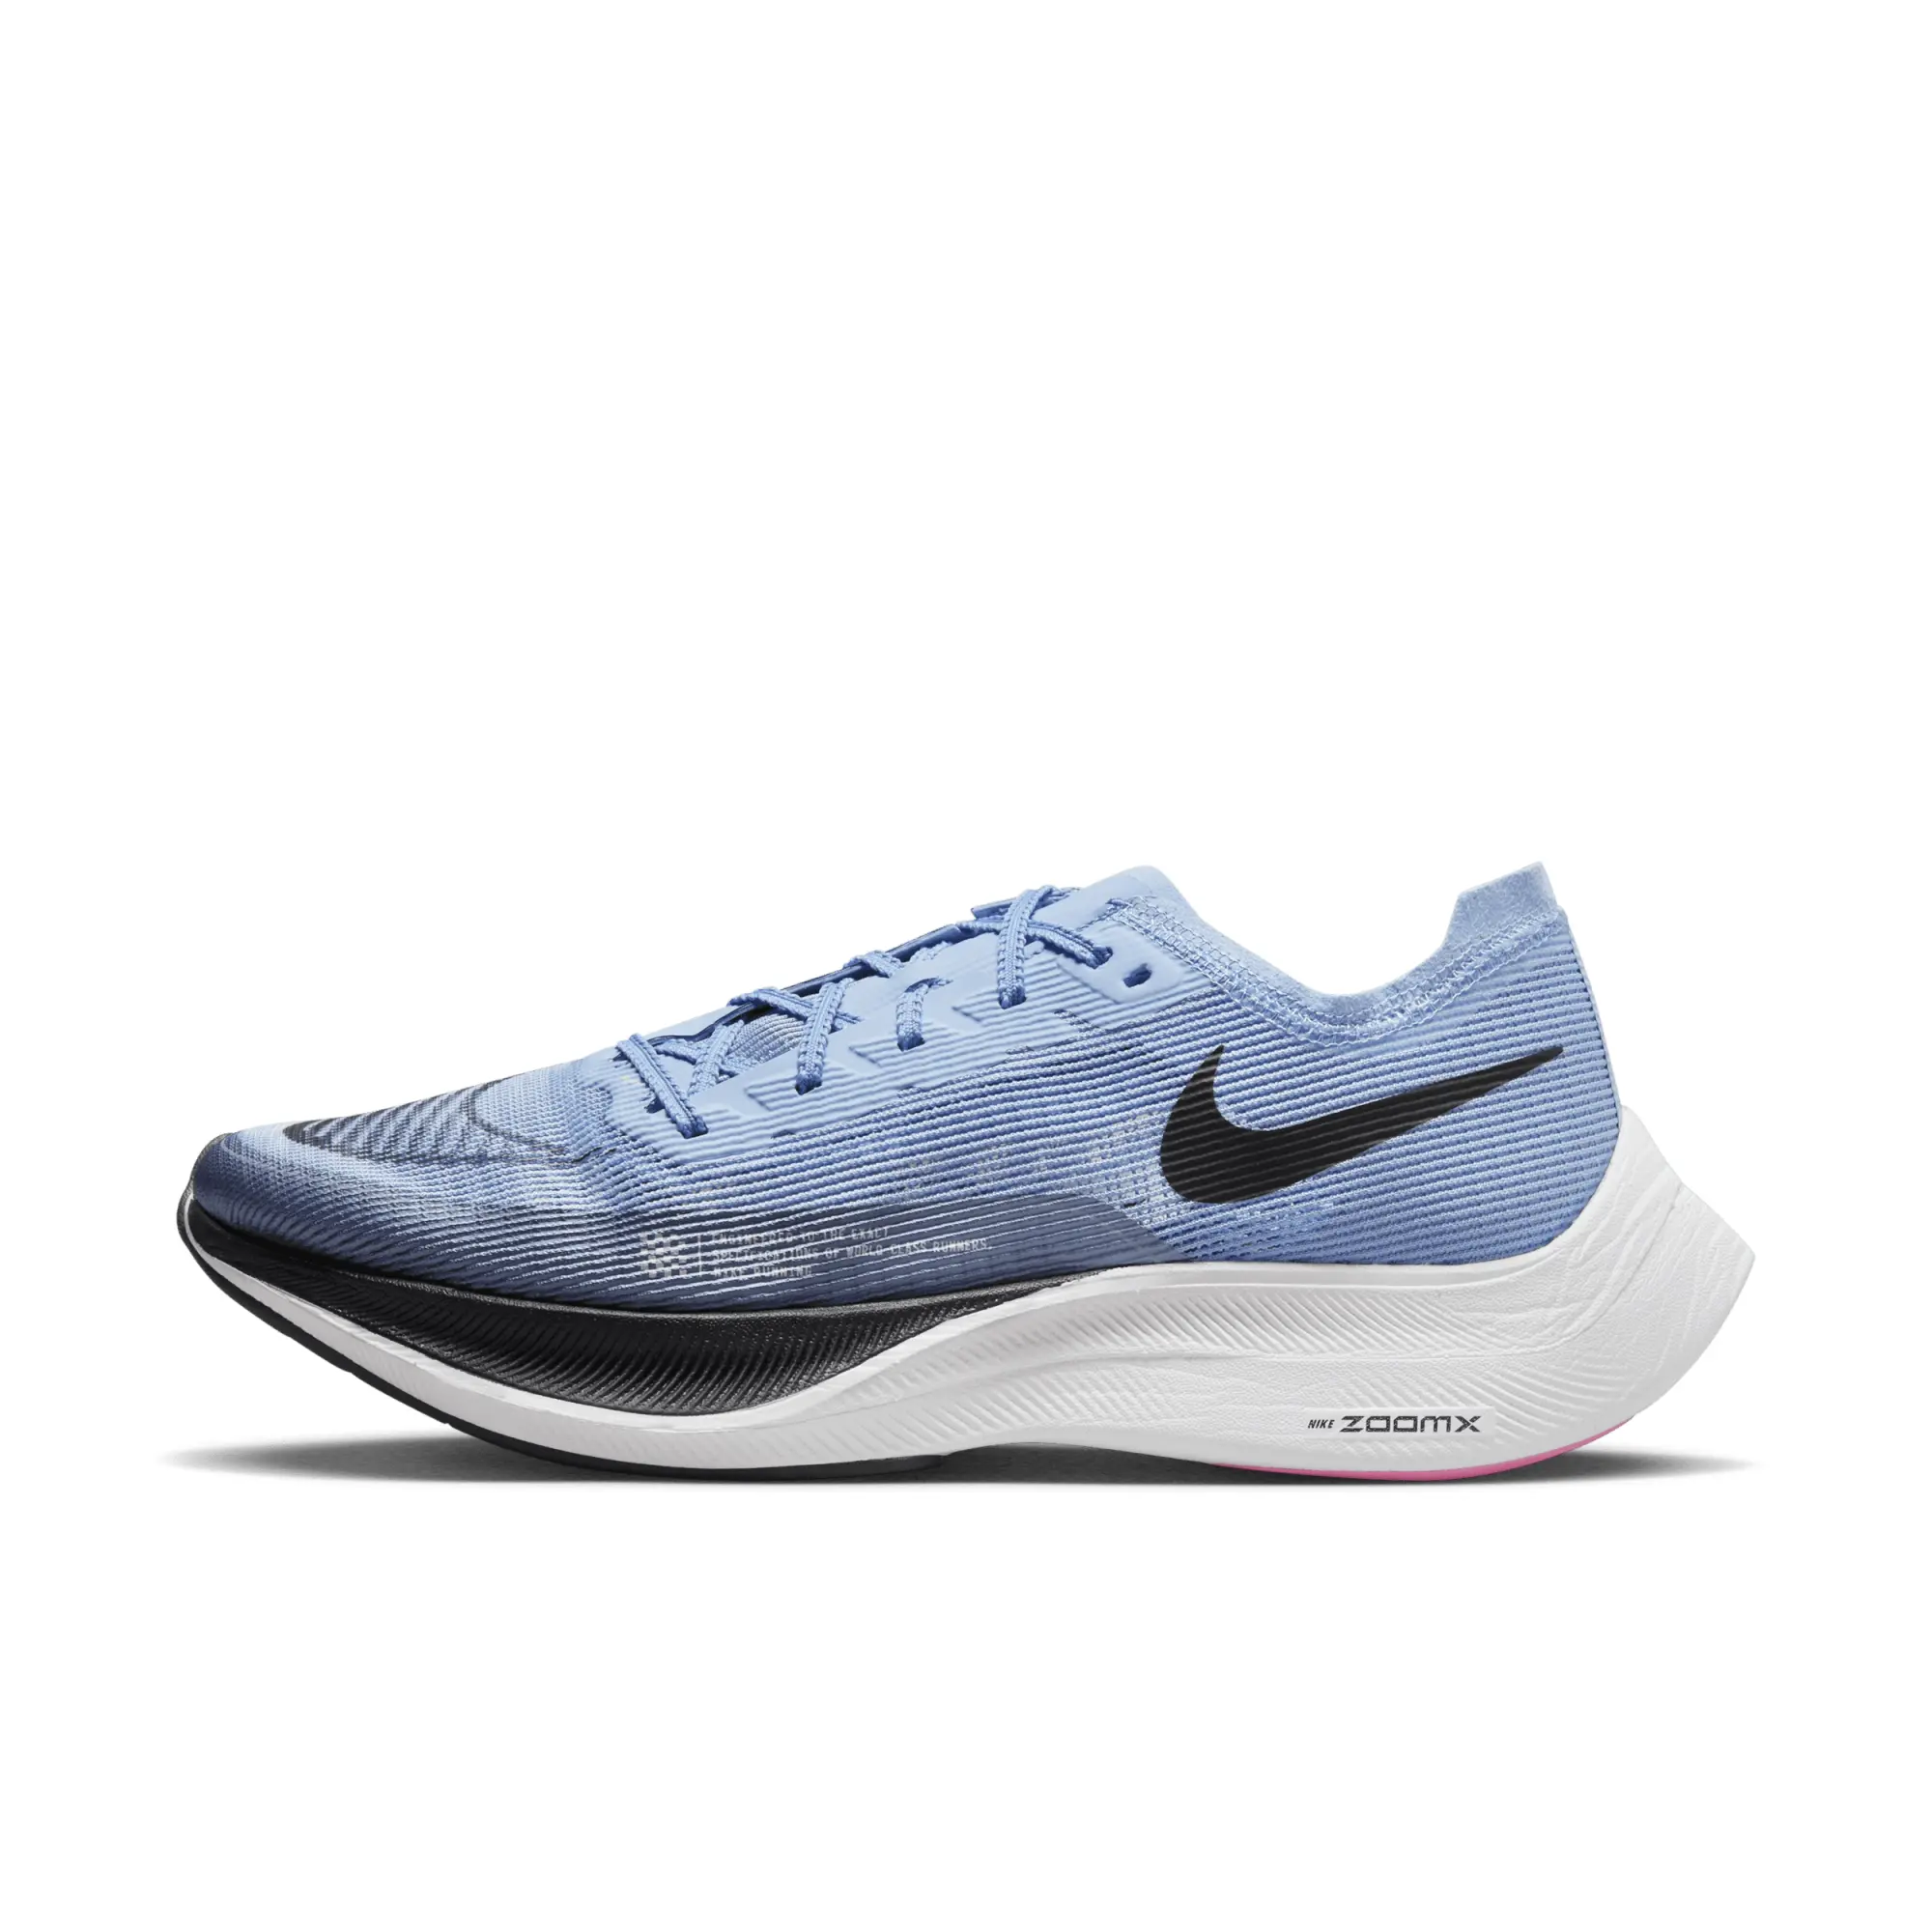 Nike ZoomX Vaporfly Next% 2 Cobalt Bliss Shoes